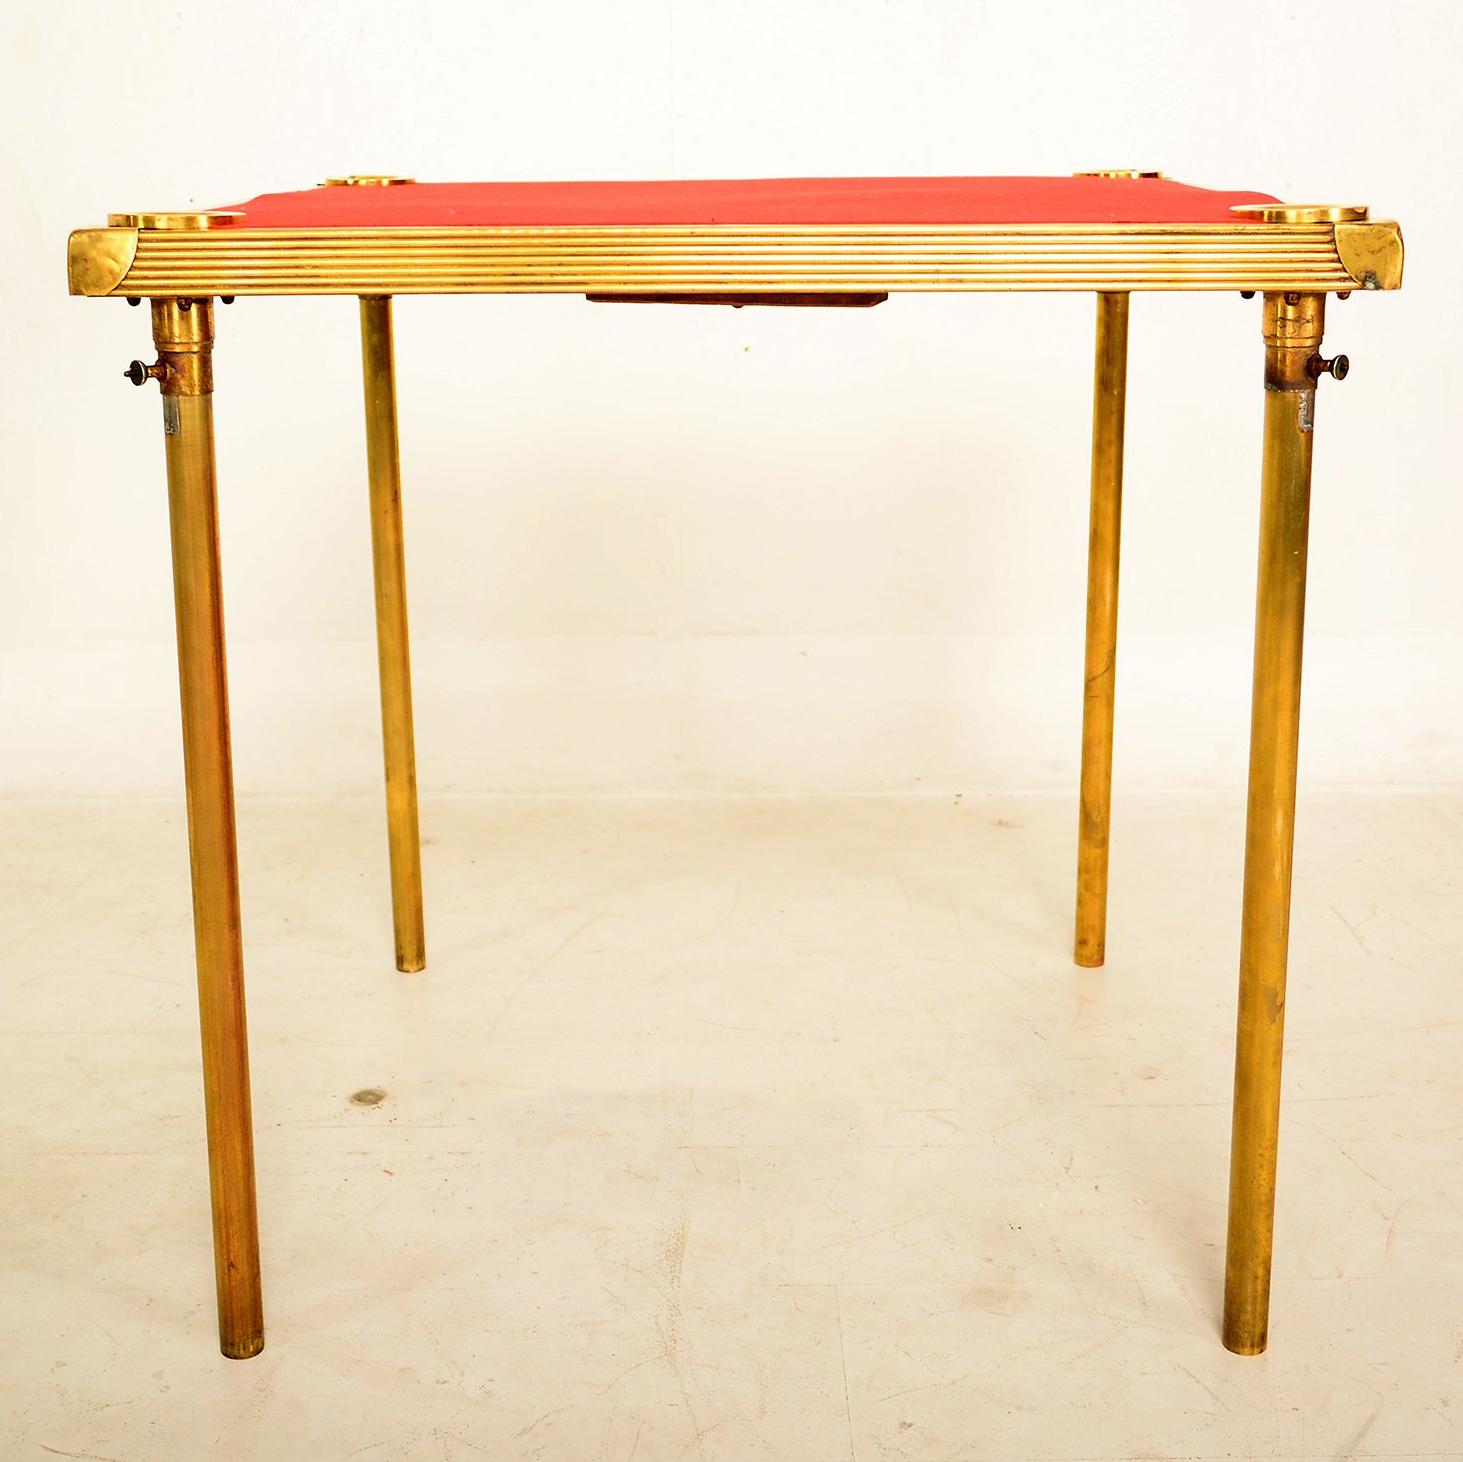 For your consideration a one of kind game table made in France, circa 1930s.

The construction is made of brass and wood frame. 

The legs can be removed with ease and stored underneath the table top with a very creative storage system.

Each